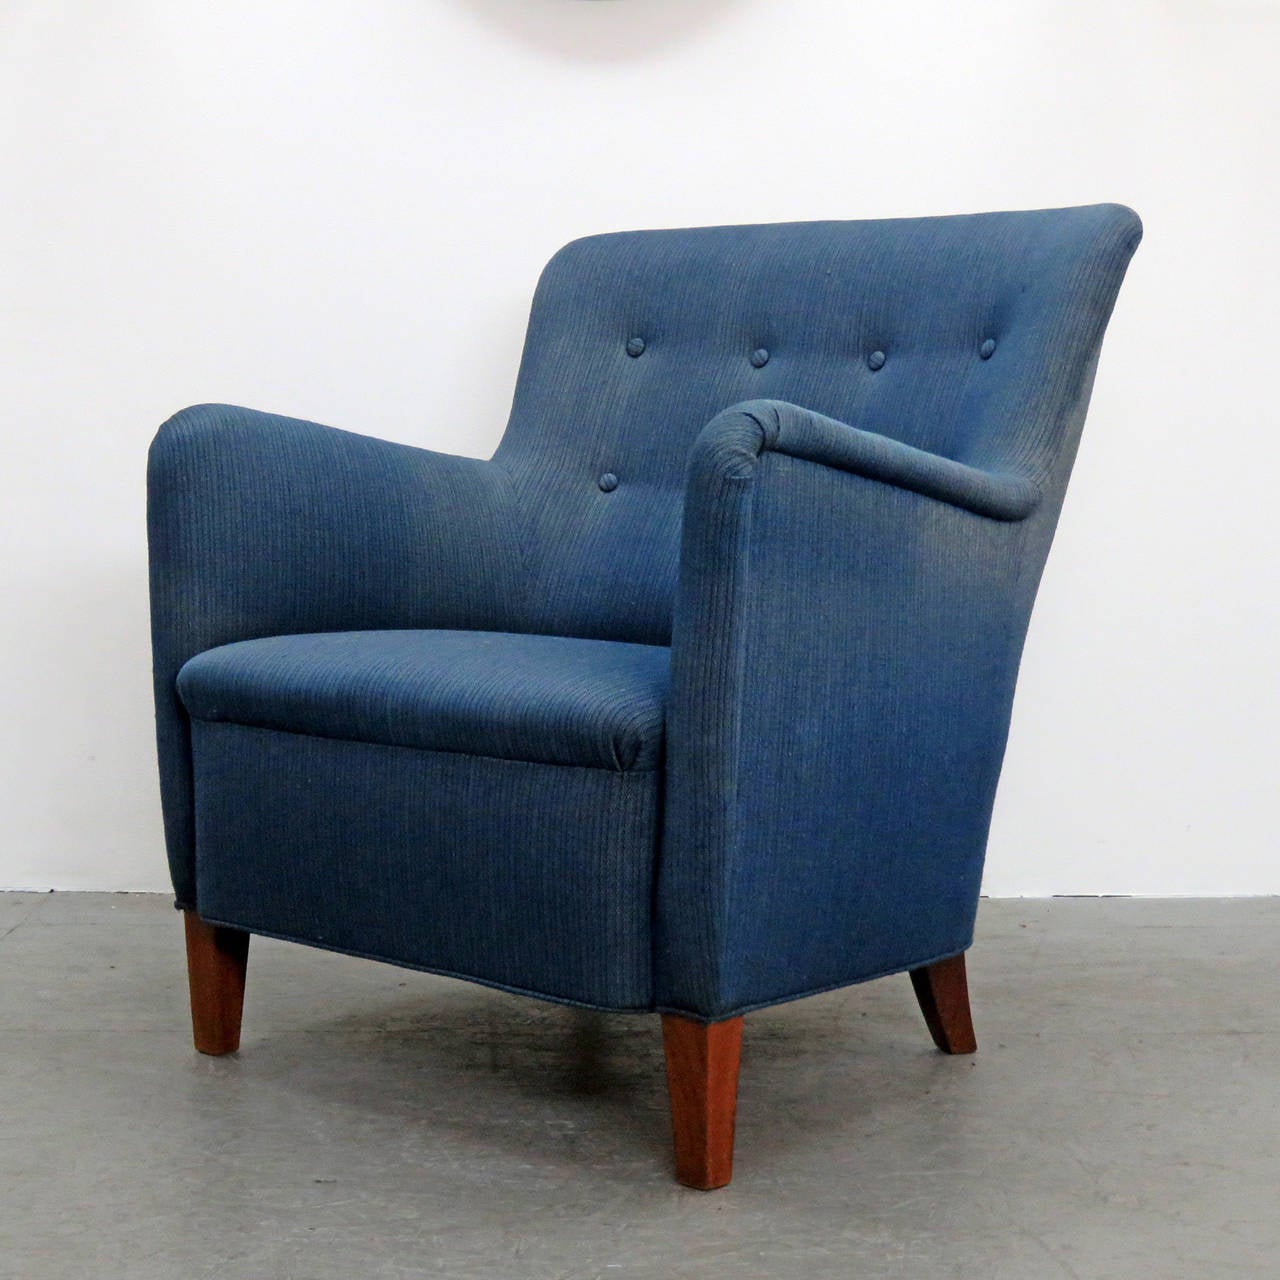 Wonderful dansk mobler club chair in style of Fritz Hansen easy chairs 1669 with original blue upholstery and teak legs.